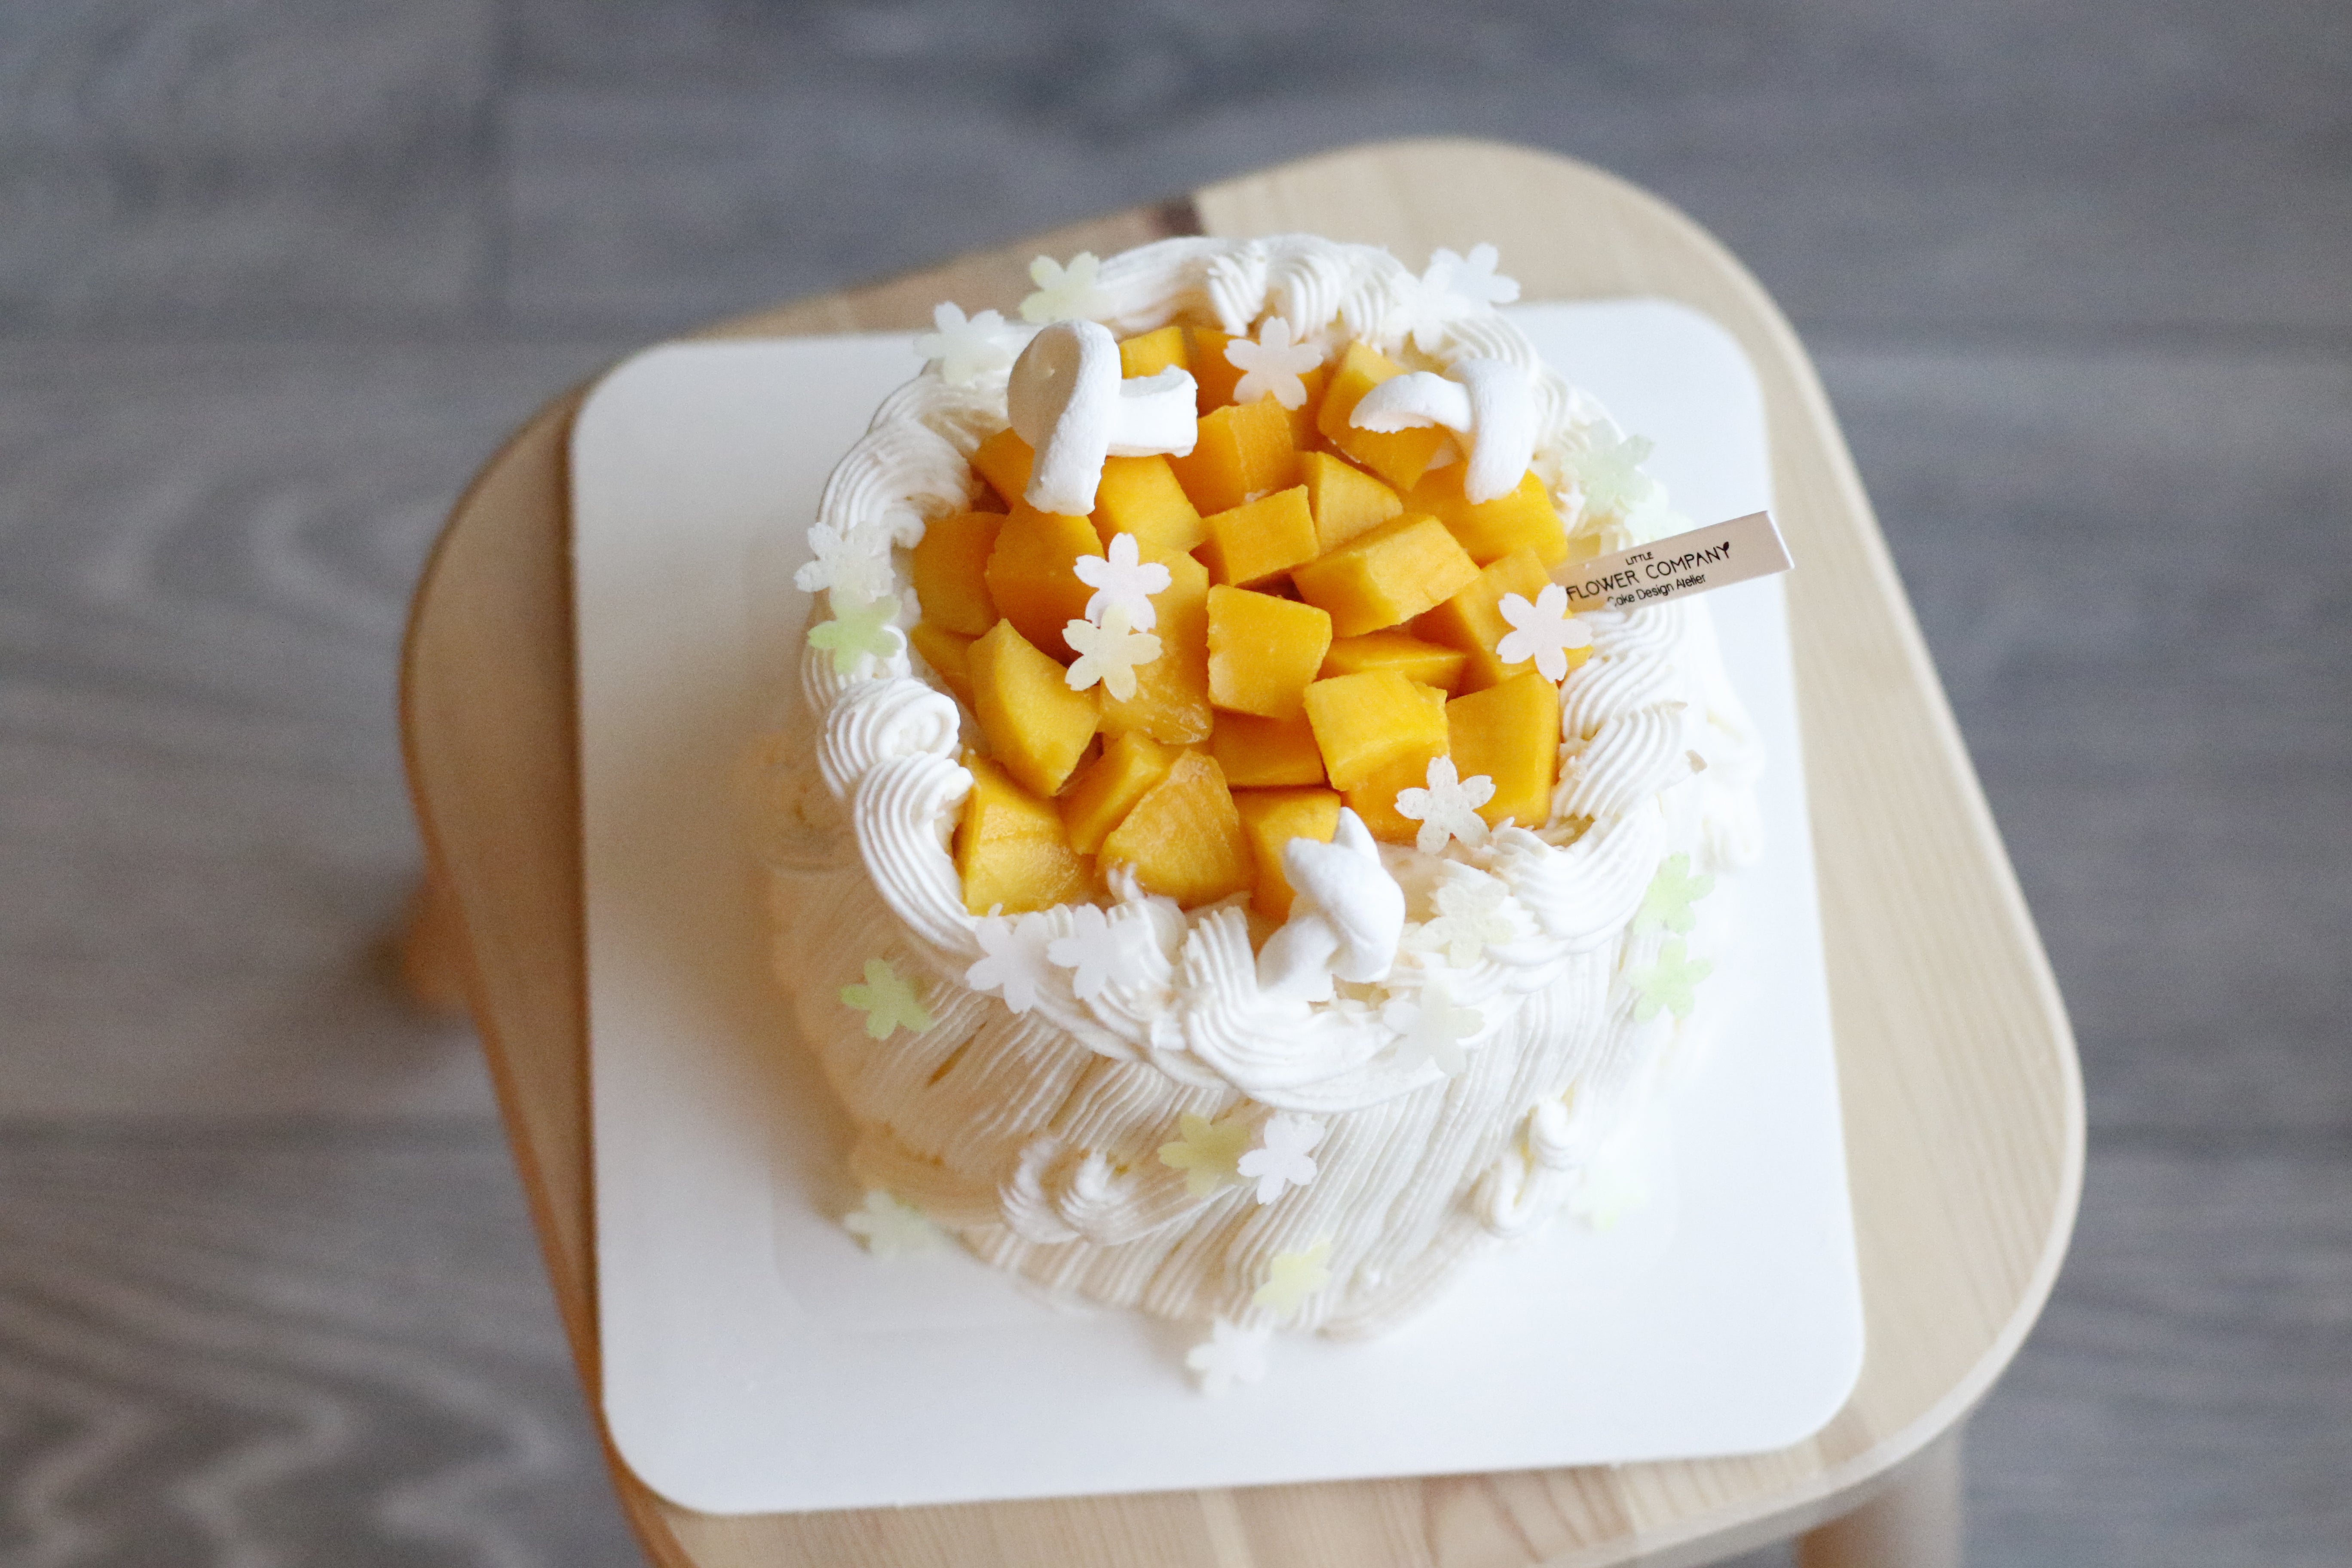 Spring Fresh Mango cloud chiffon cream cake (For limited time only)